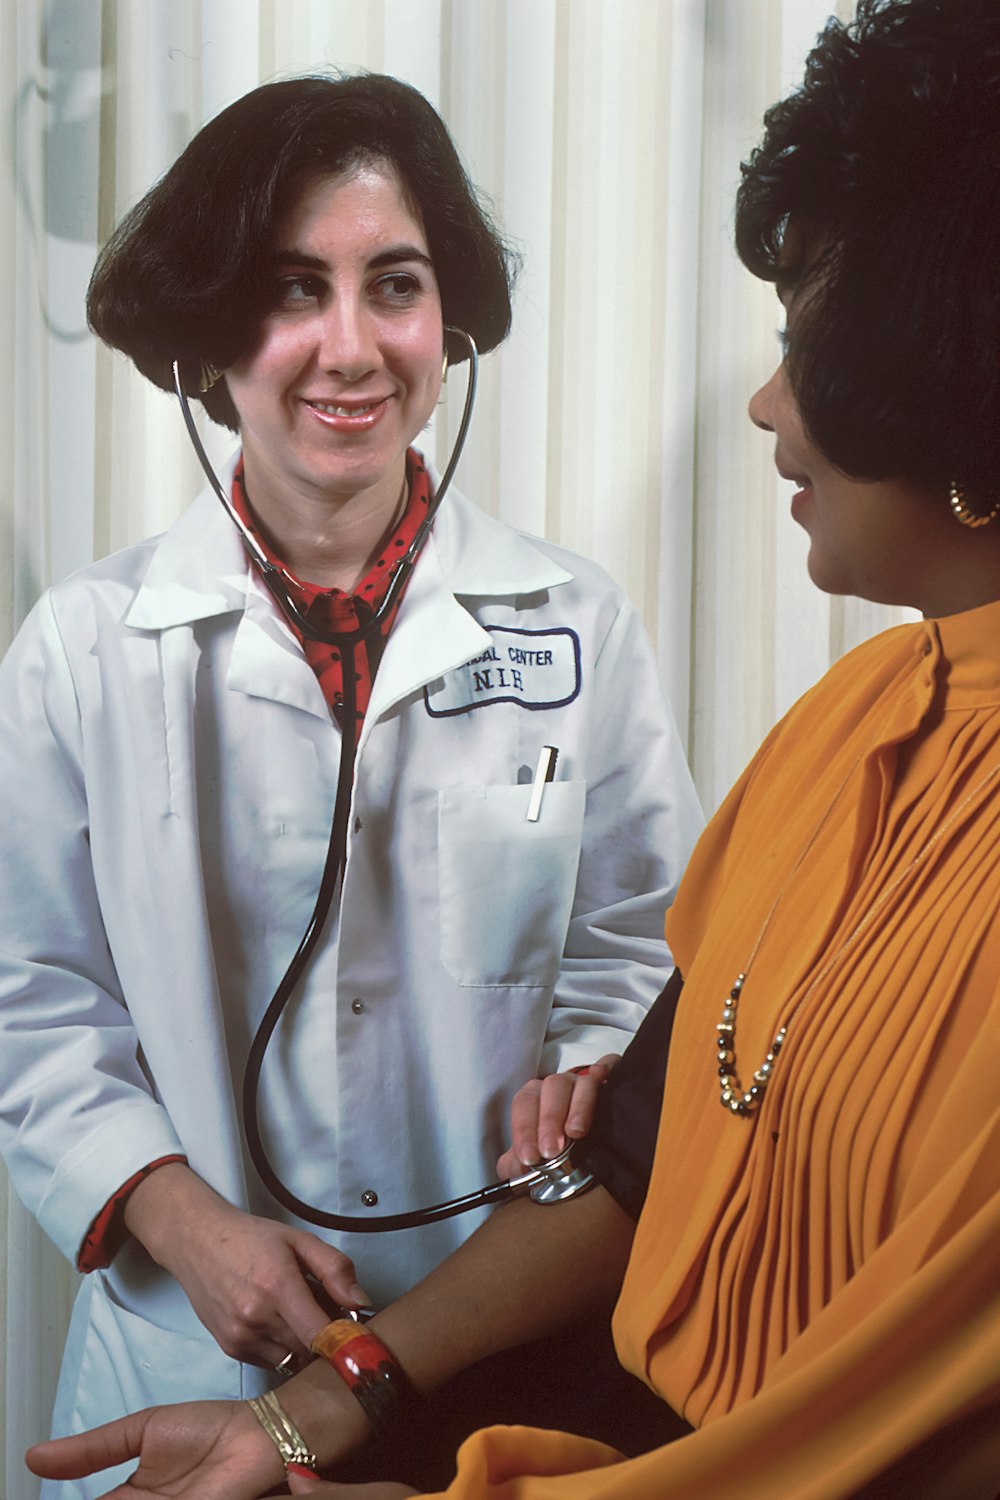 a woman in a doctor's coat talking to another woman